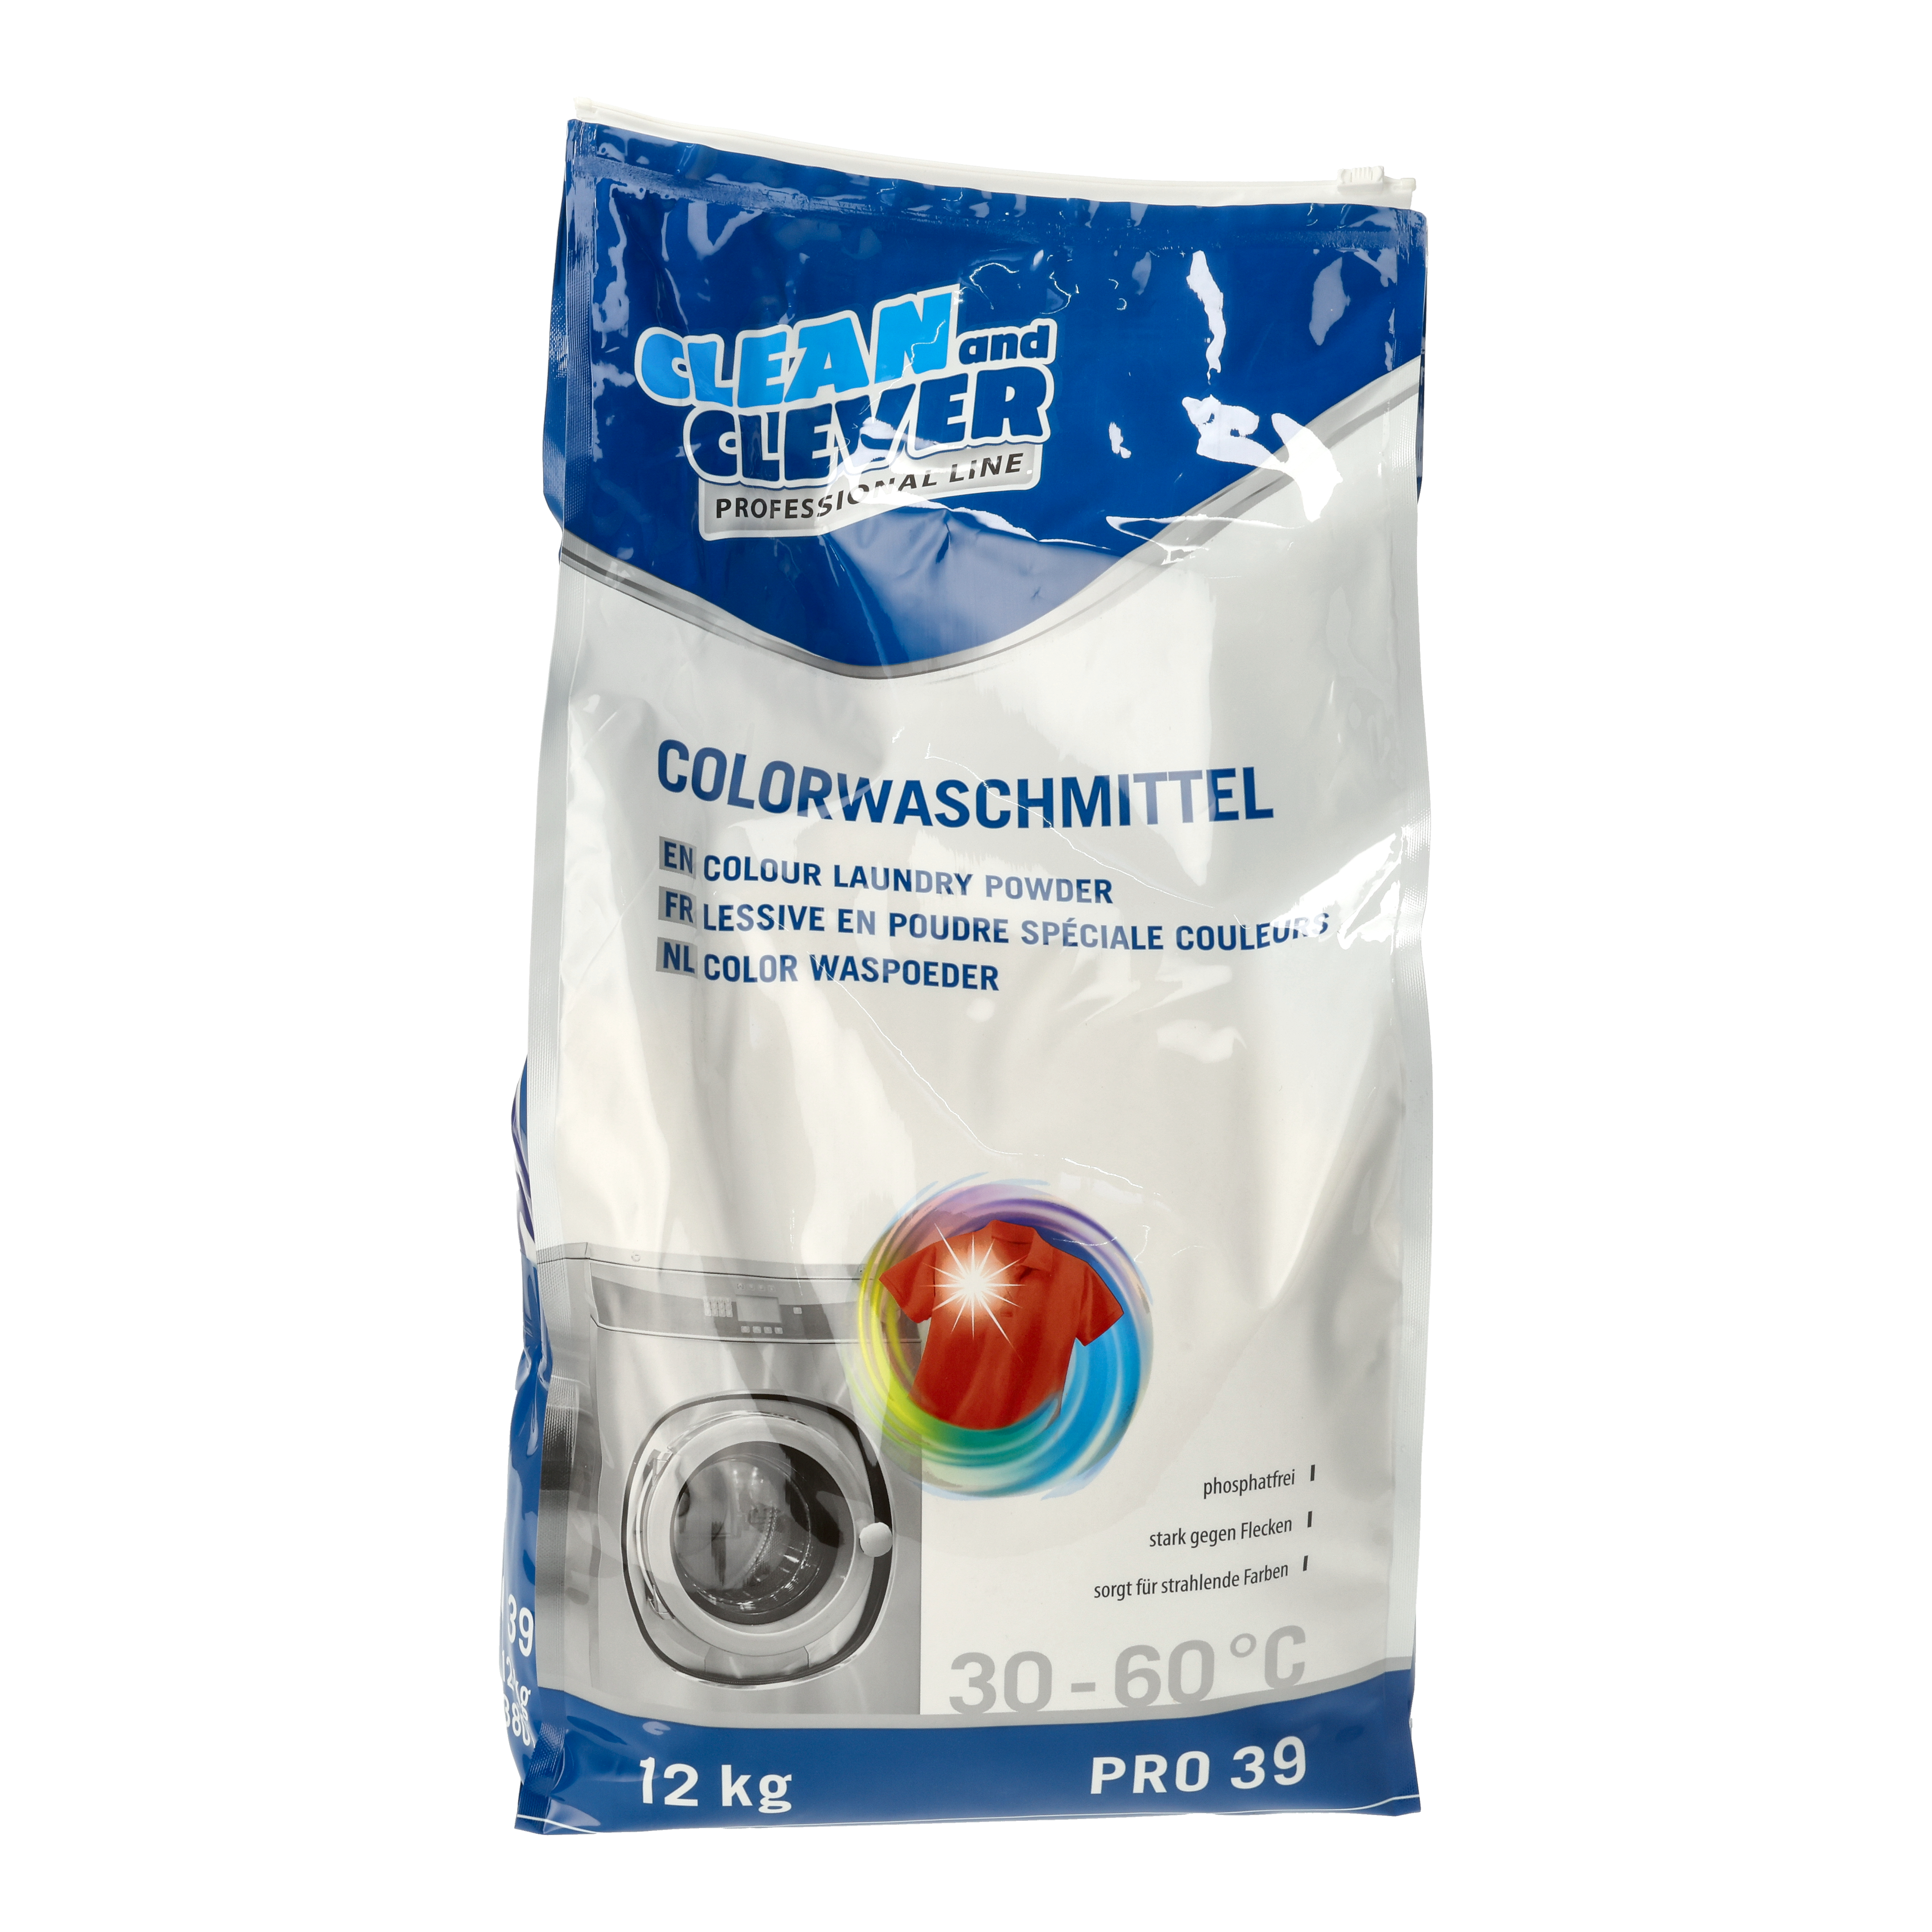 CLEAN and CLEVER PROFESSIONAL Colorwaschmittel PRO39 - 12 kg